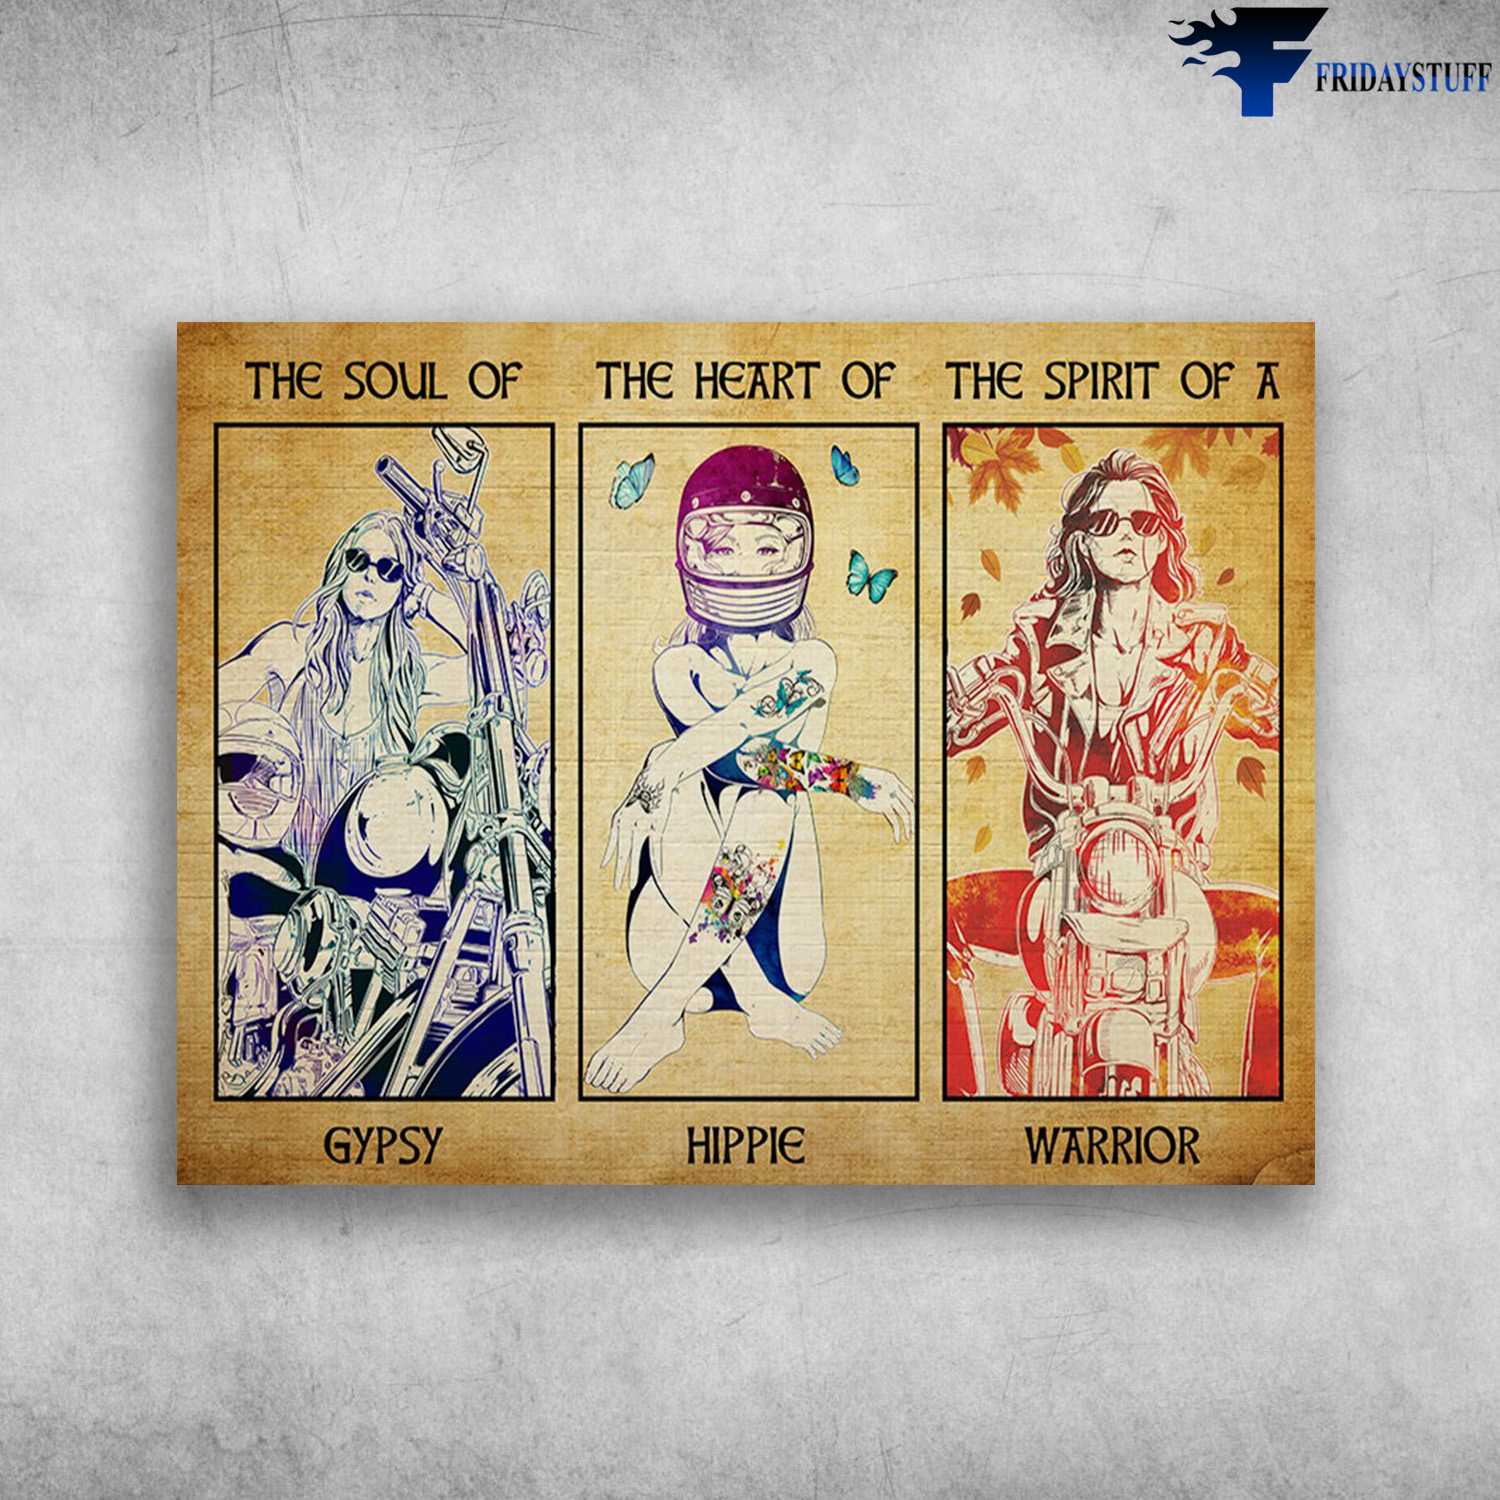 Biker Poster, Motorcycle Lady - The Soul Of Gypsy, The Heart Of Hippie, The Spirit Of A Warrior